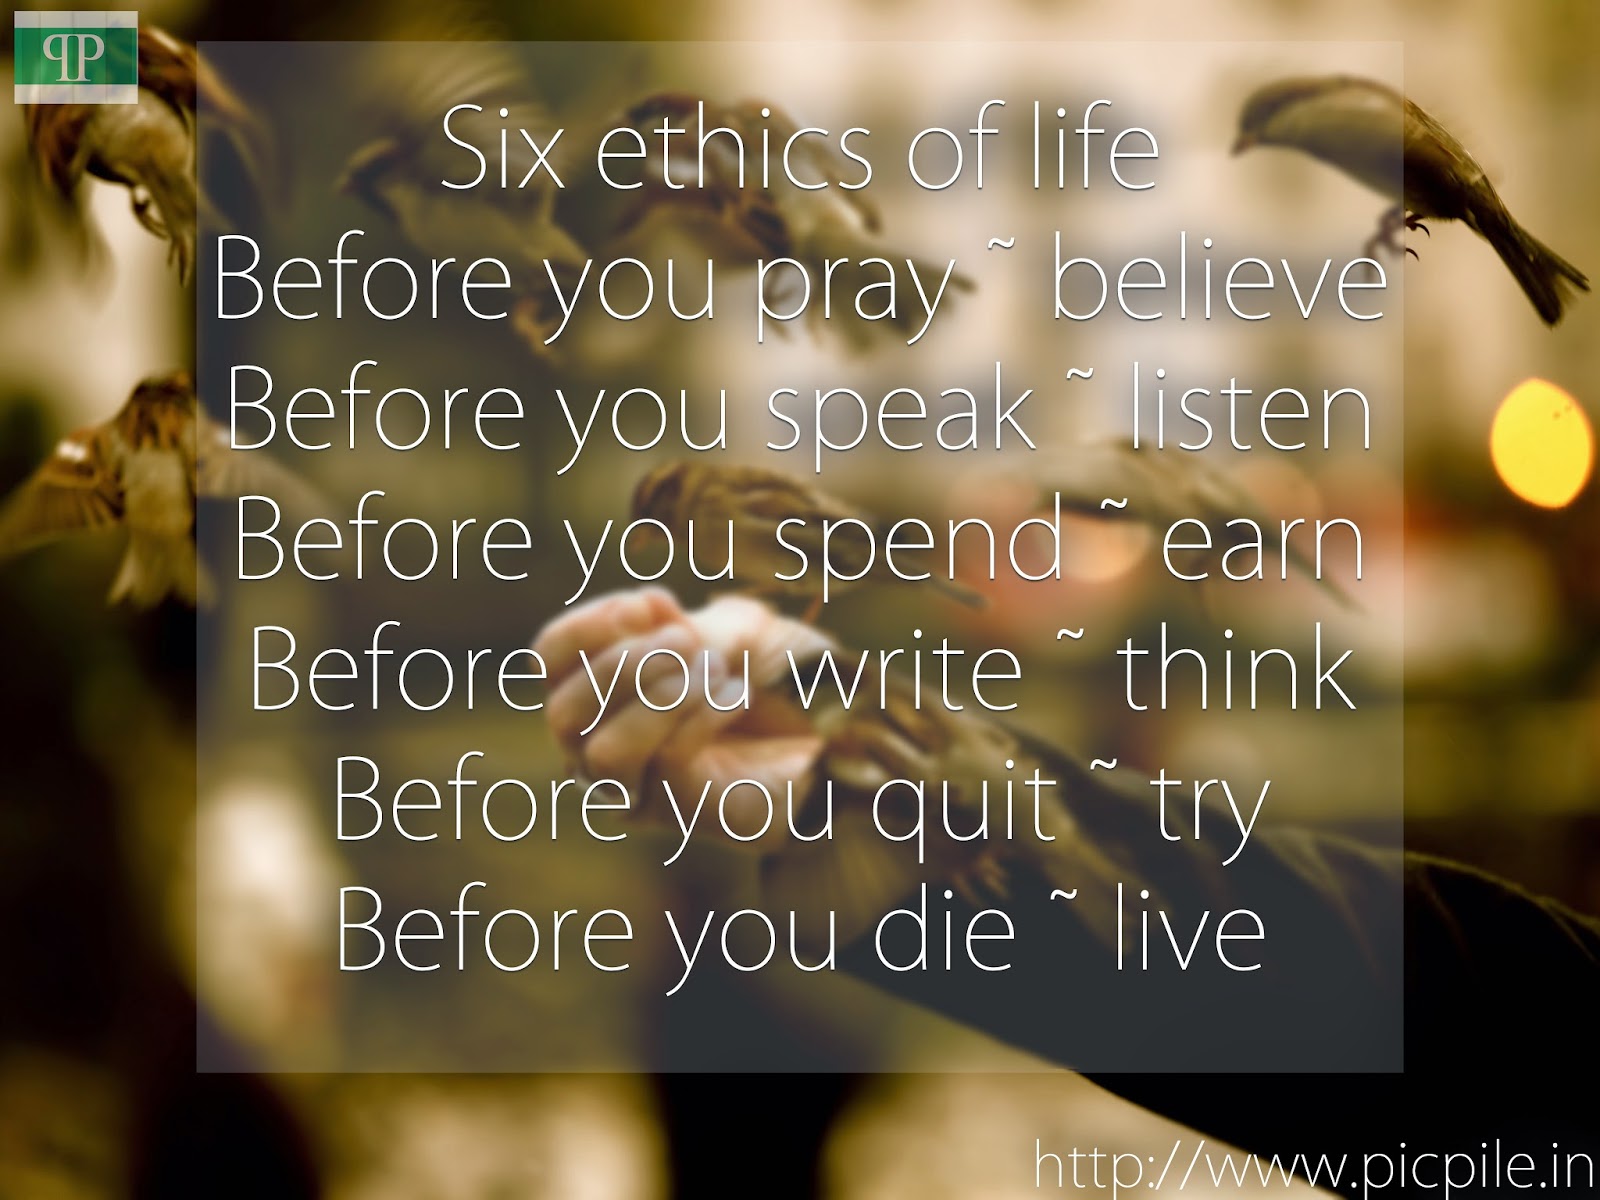 Six Ethics Of Life That We May Apply In Our Daily